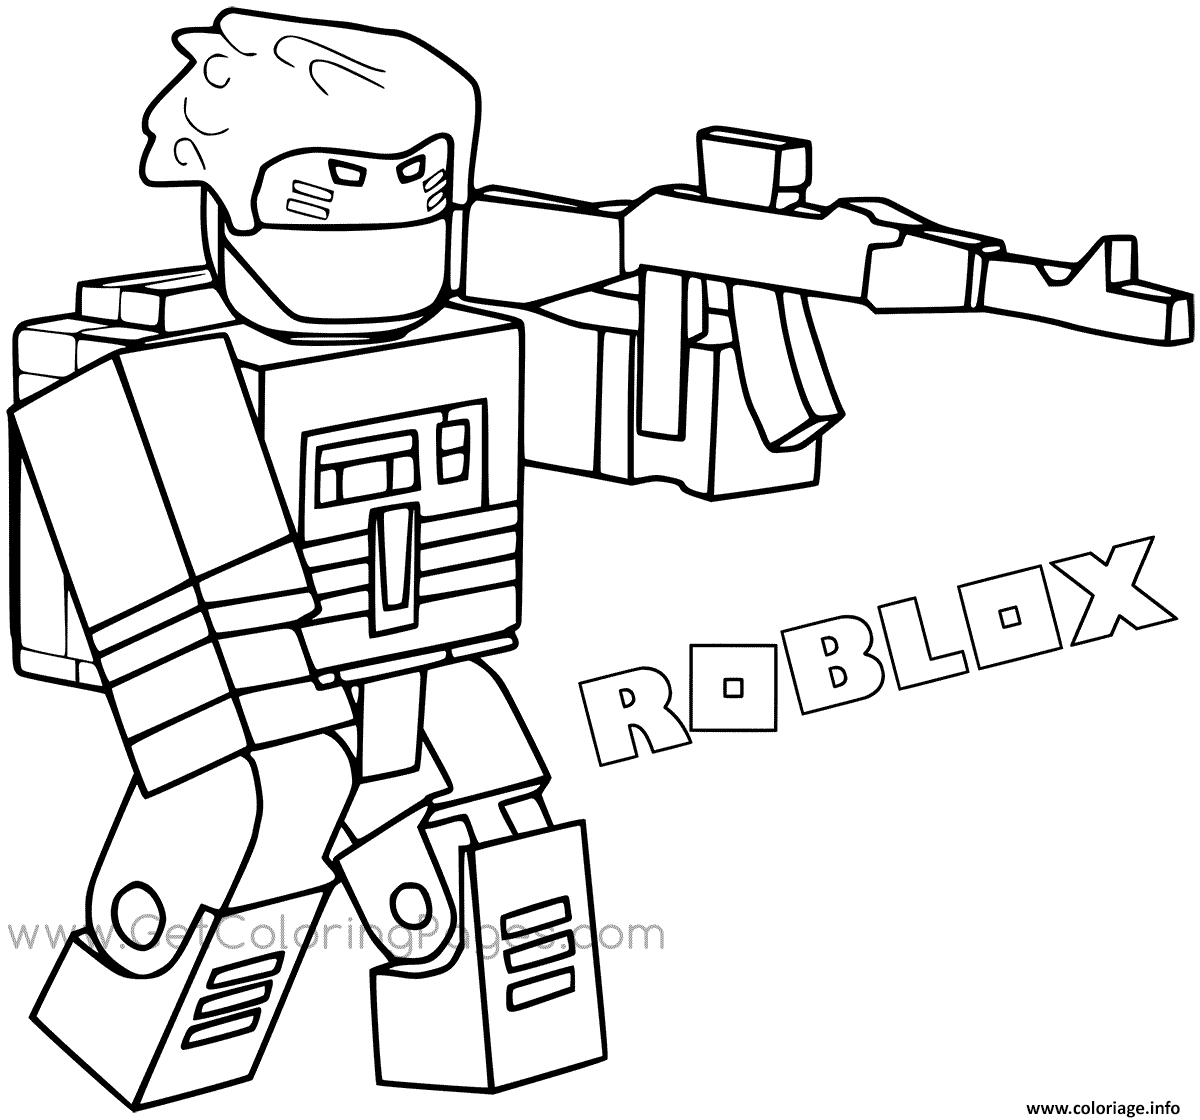 Coloriage Roblox Bandit With Weapon And Backpac Dessin Roblox À Imprimer à Dessin Roblox À Imprimer